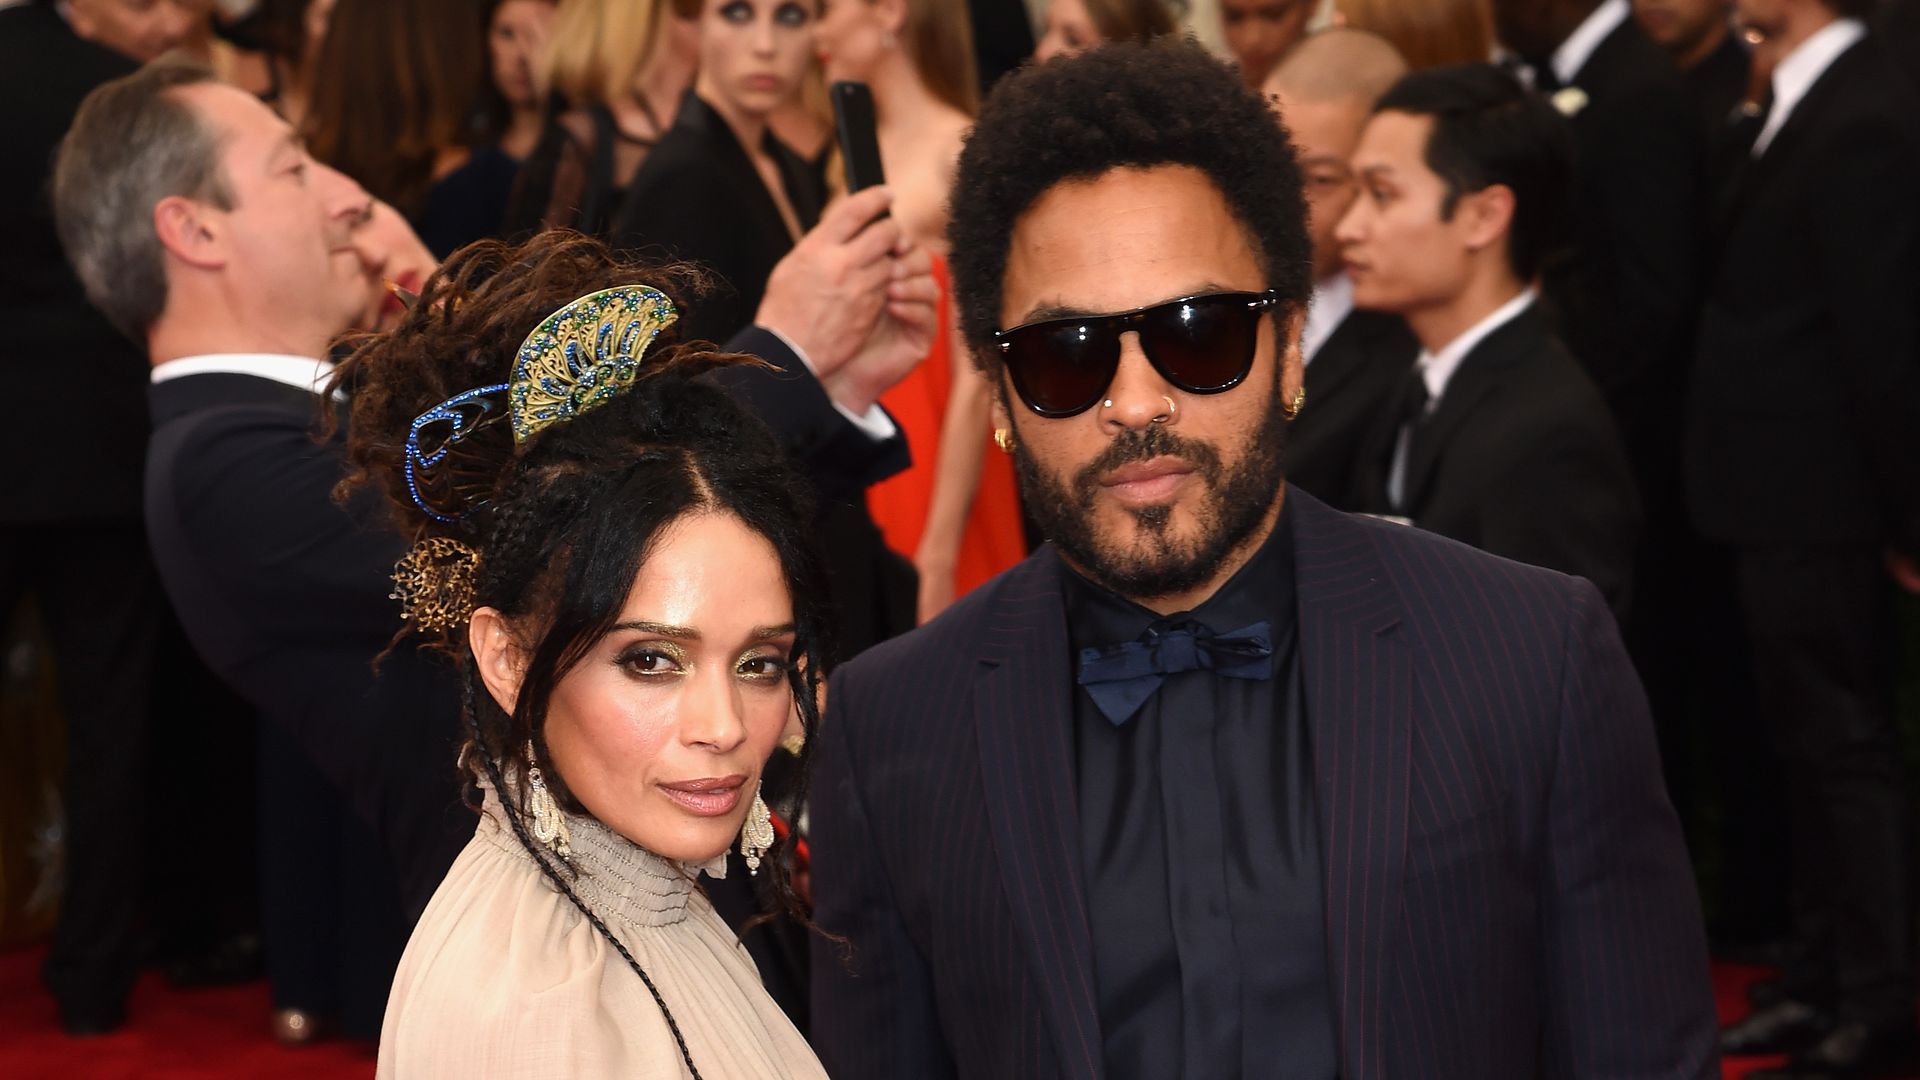 Lisa Bonet and Lenny Kravitz attend the "China: Through The Looking Glass" Costume Institute Benefit Gala at the Metropolitan Museum of Art on May 4, 2015 in New York City